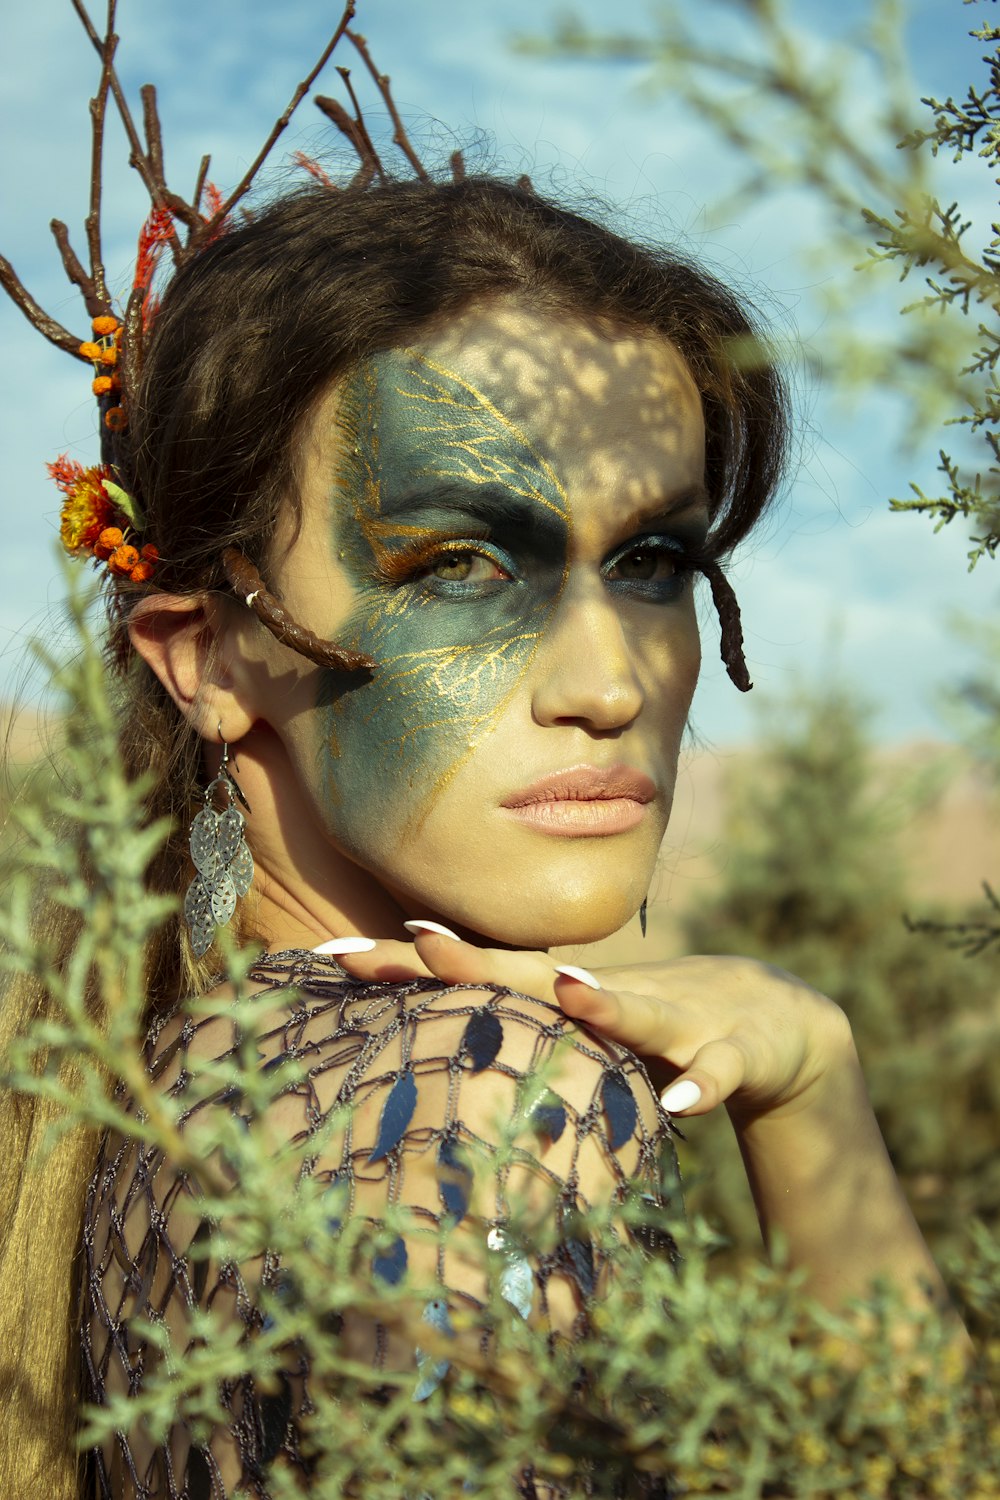 a woman with painted face and body in a field